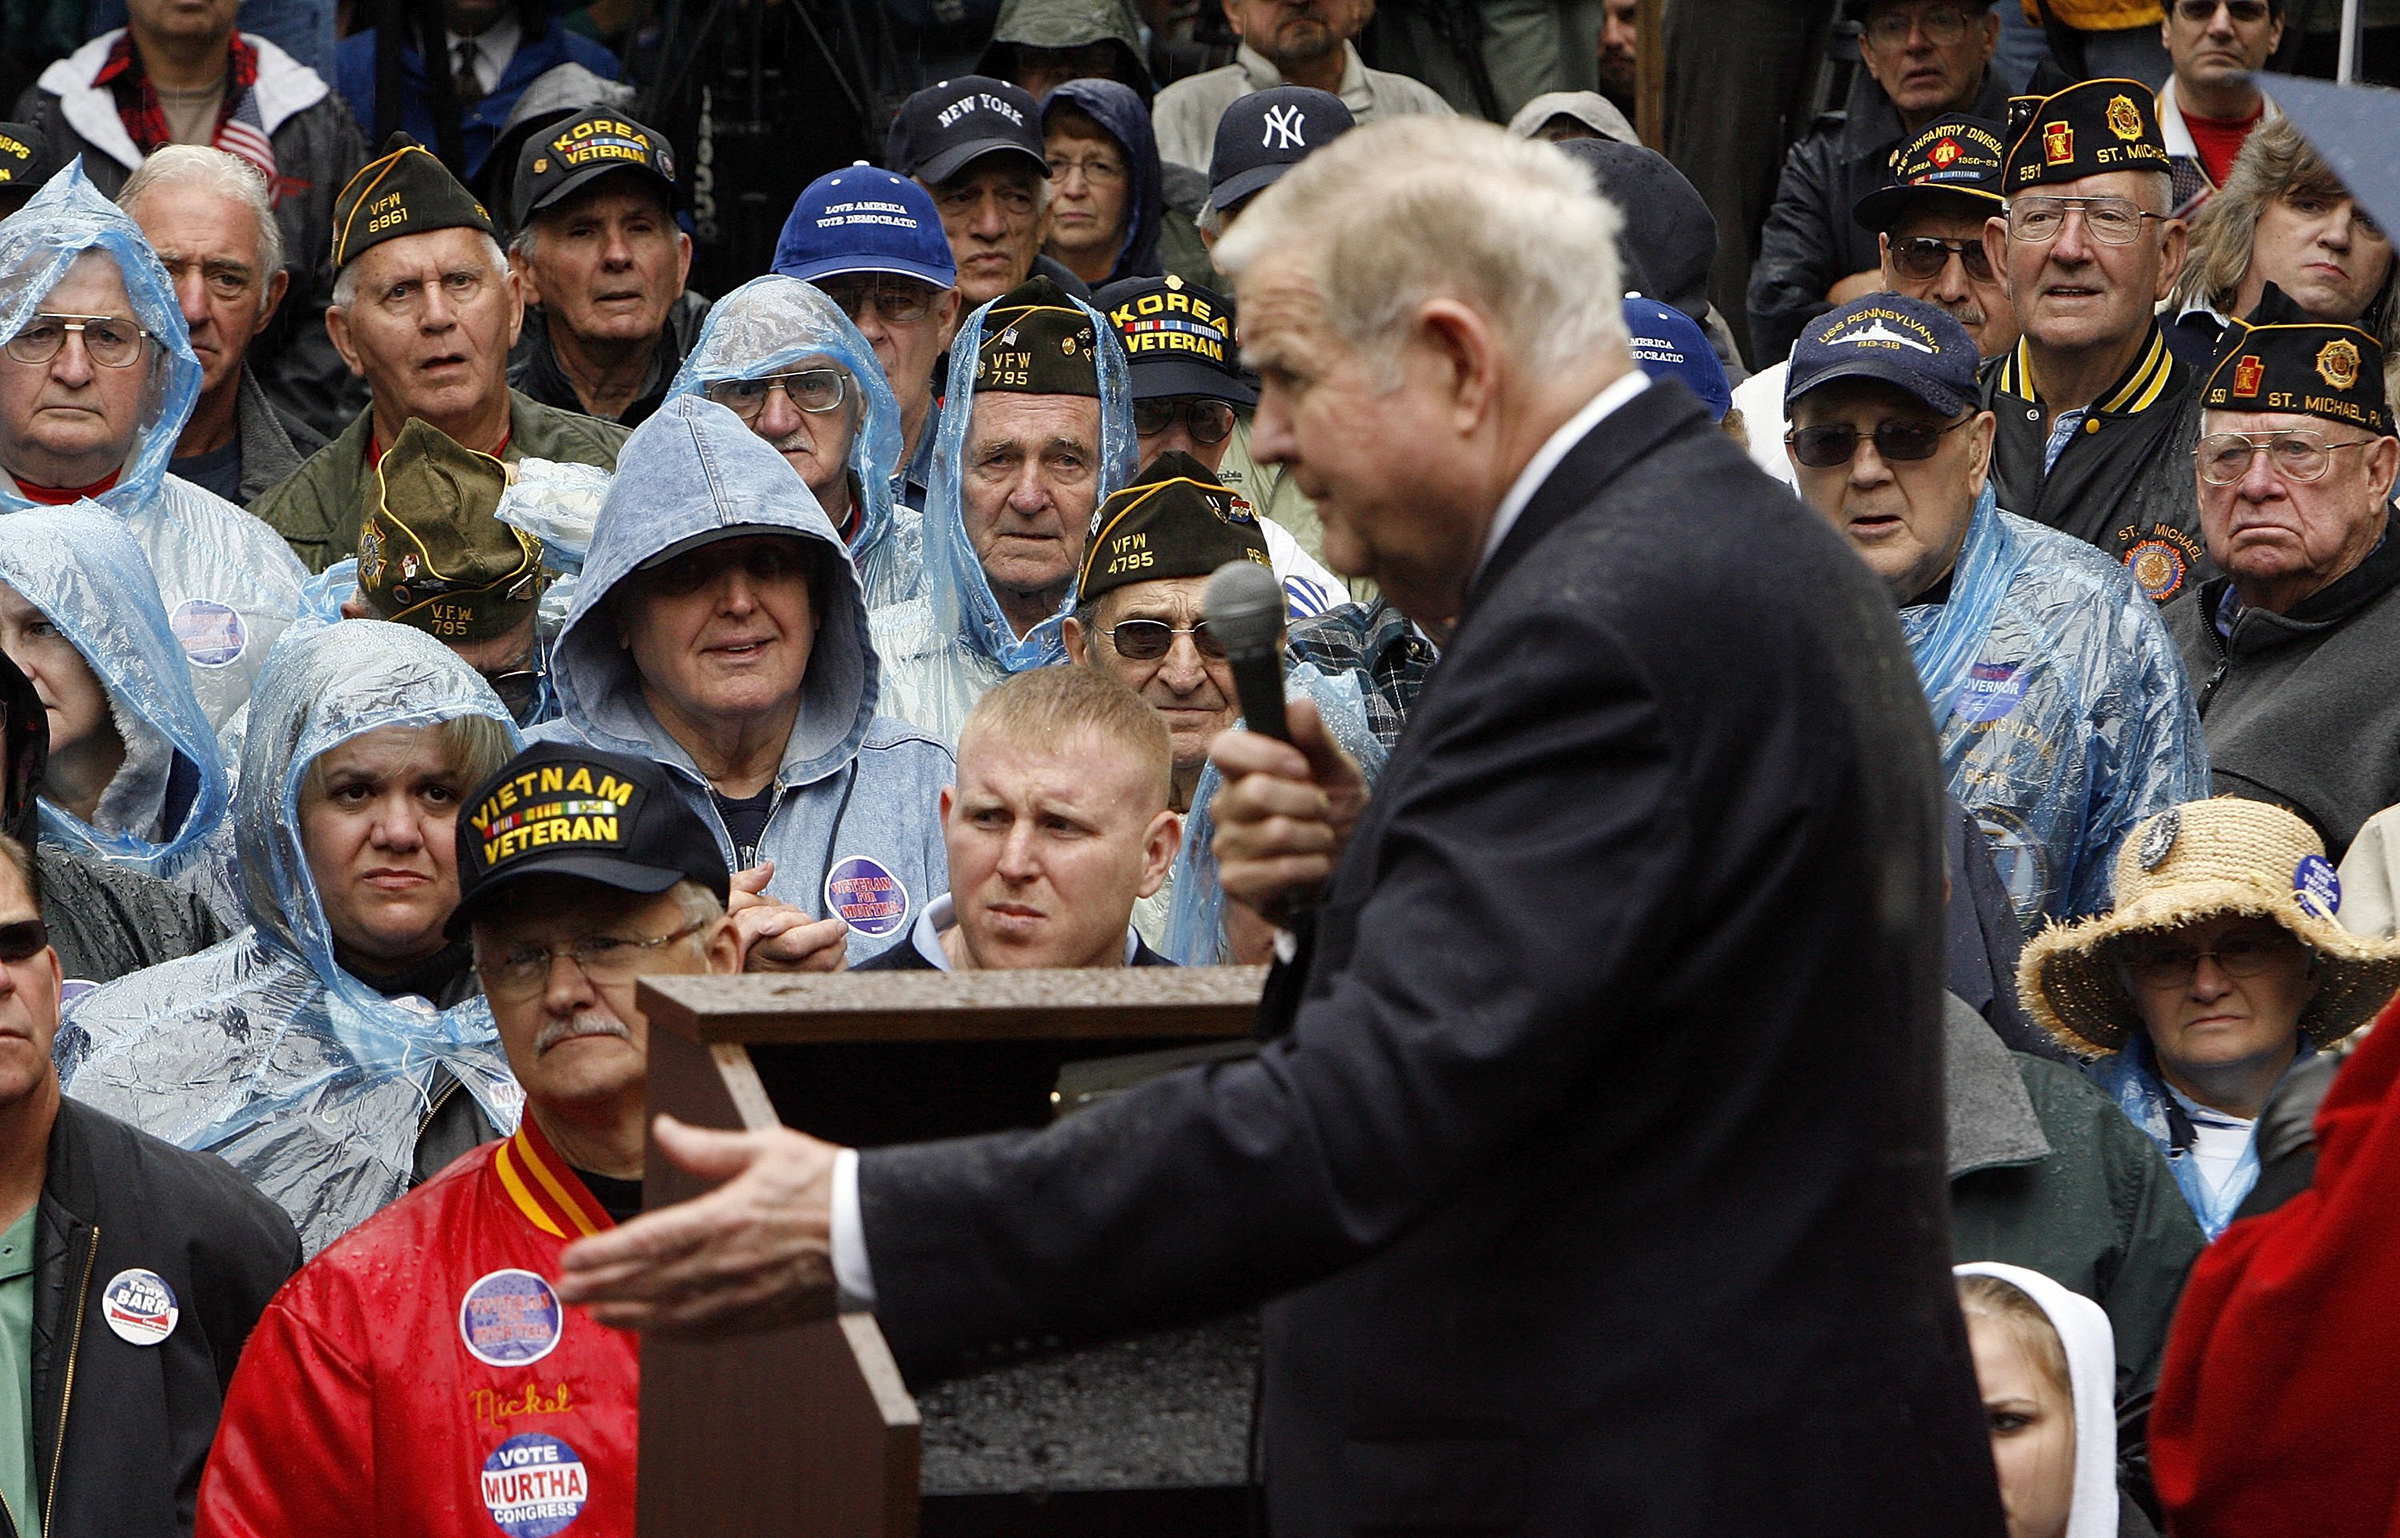 All eyes are on Rep. John Murtha (D-PA) as he addresses voters and veterans during a campaign rally in Johnstown, Pa., on Sept. 30, 2006. Murtha was the first Vietnam combat veteran elected to U.S. Congress in 1974.